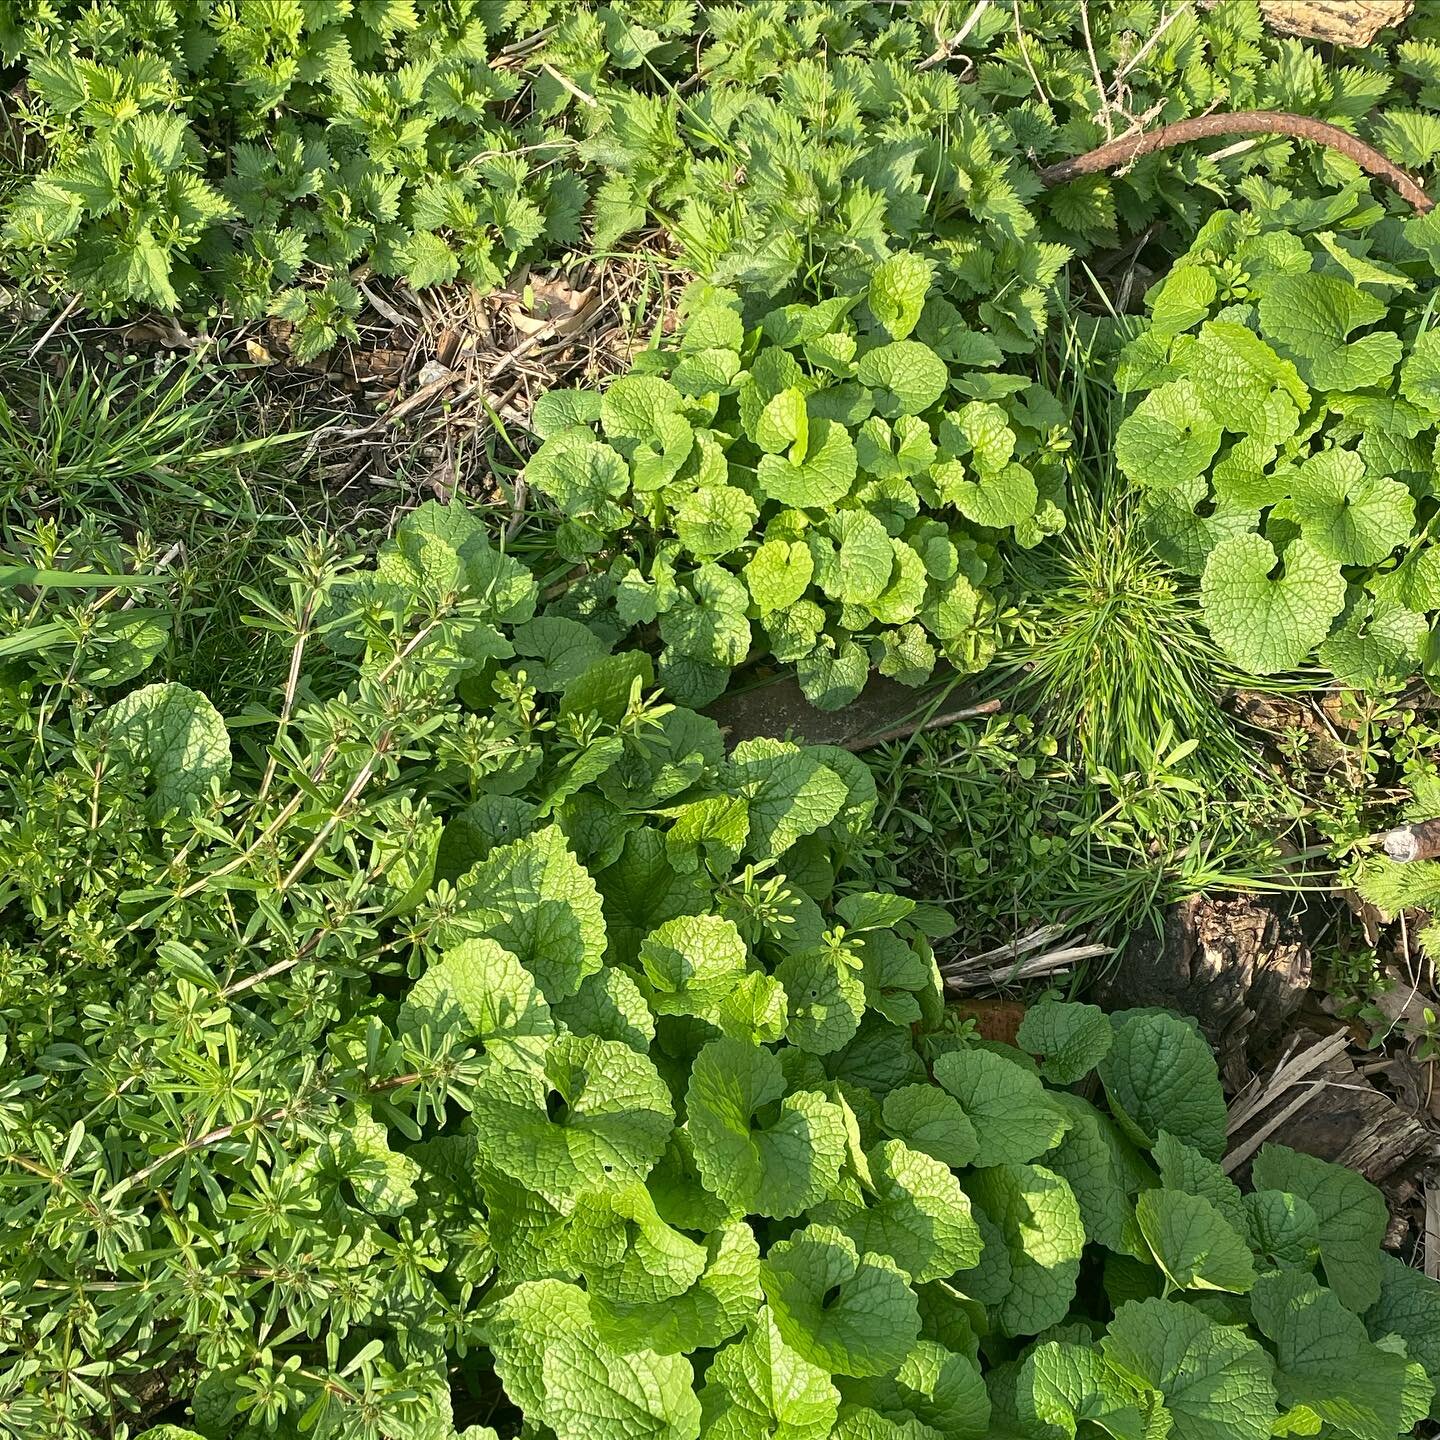 Wilder green spaces are abundant with springtime weeds at this time of year and most of these are both edible and medicinal! Spring is such an exciting time as we welcome back some of our favourite herbs who have distinct points in the season when th